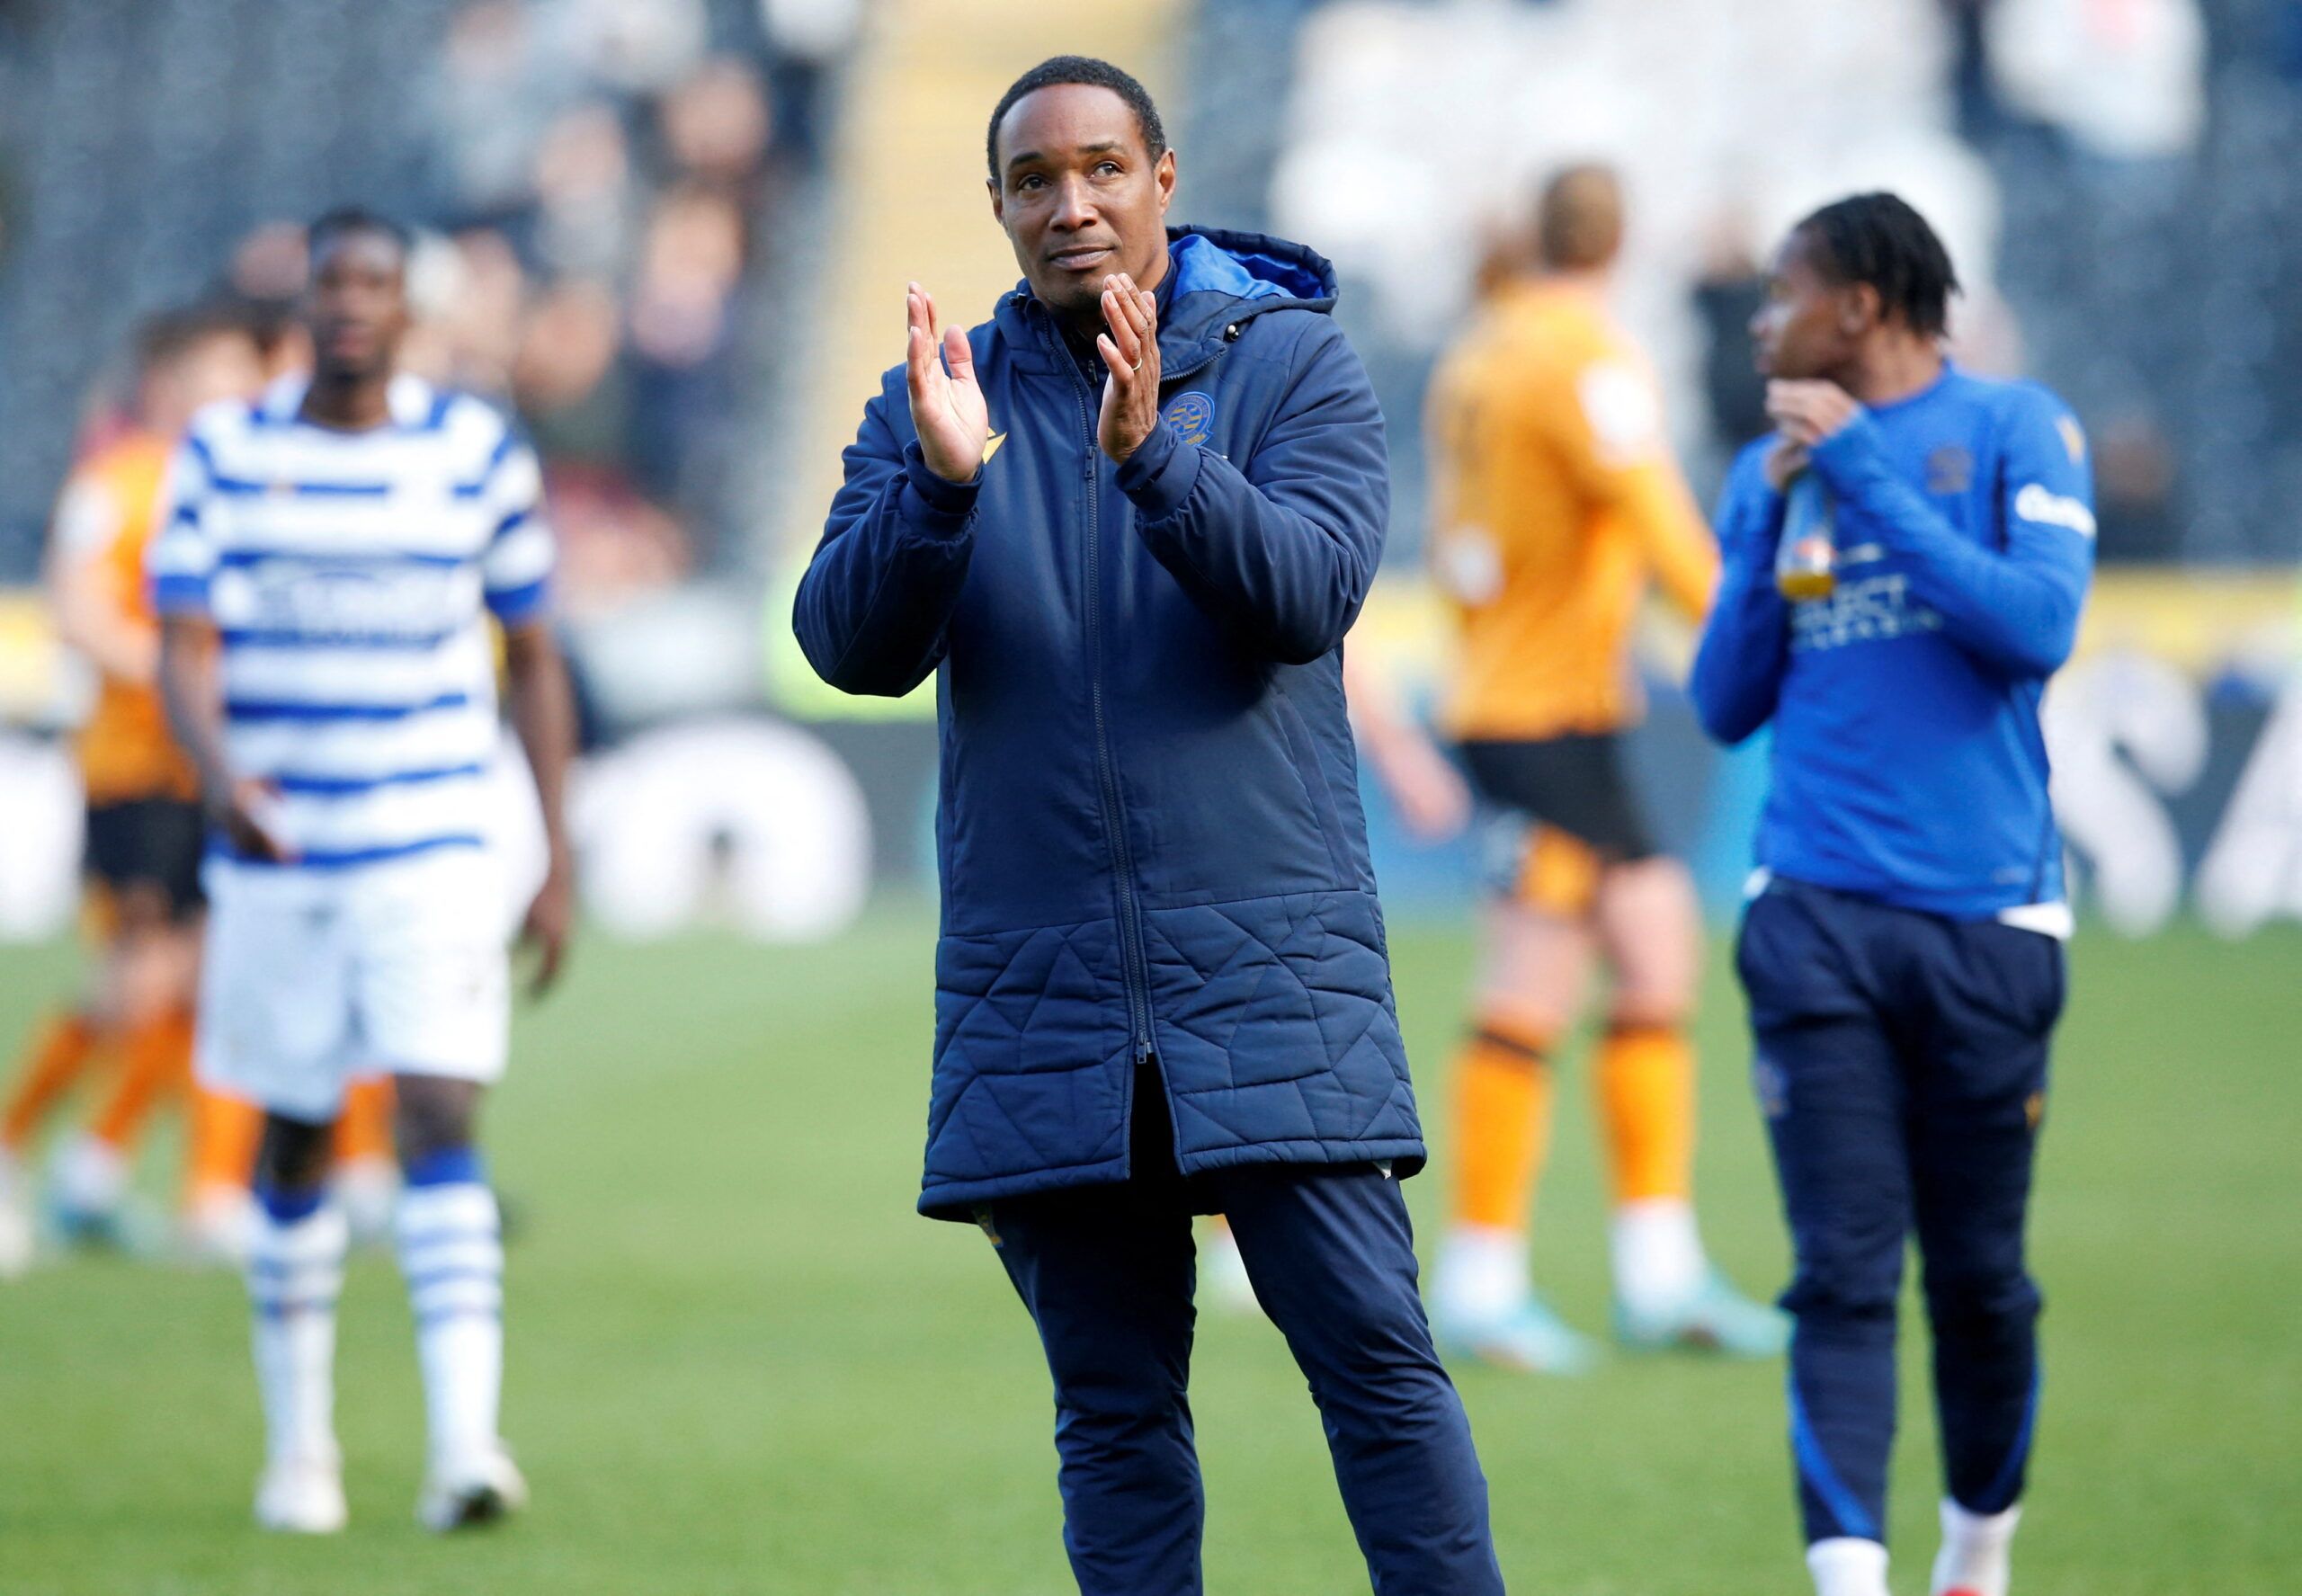 Soccer Football - Championship - Hull City v Reading - MKM Stadium, Hull, Britain - April 23, 2022 Reading manager Paul Ince applauds fans after the match  Action Images/Ed Sykes  EDITORIAL USE ONLY. No use with unauthorized audio, video, data, fixture lists, club/league logos or 